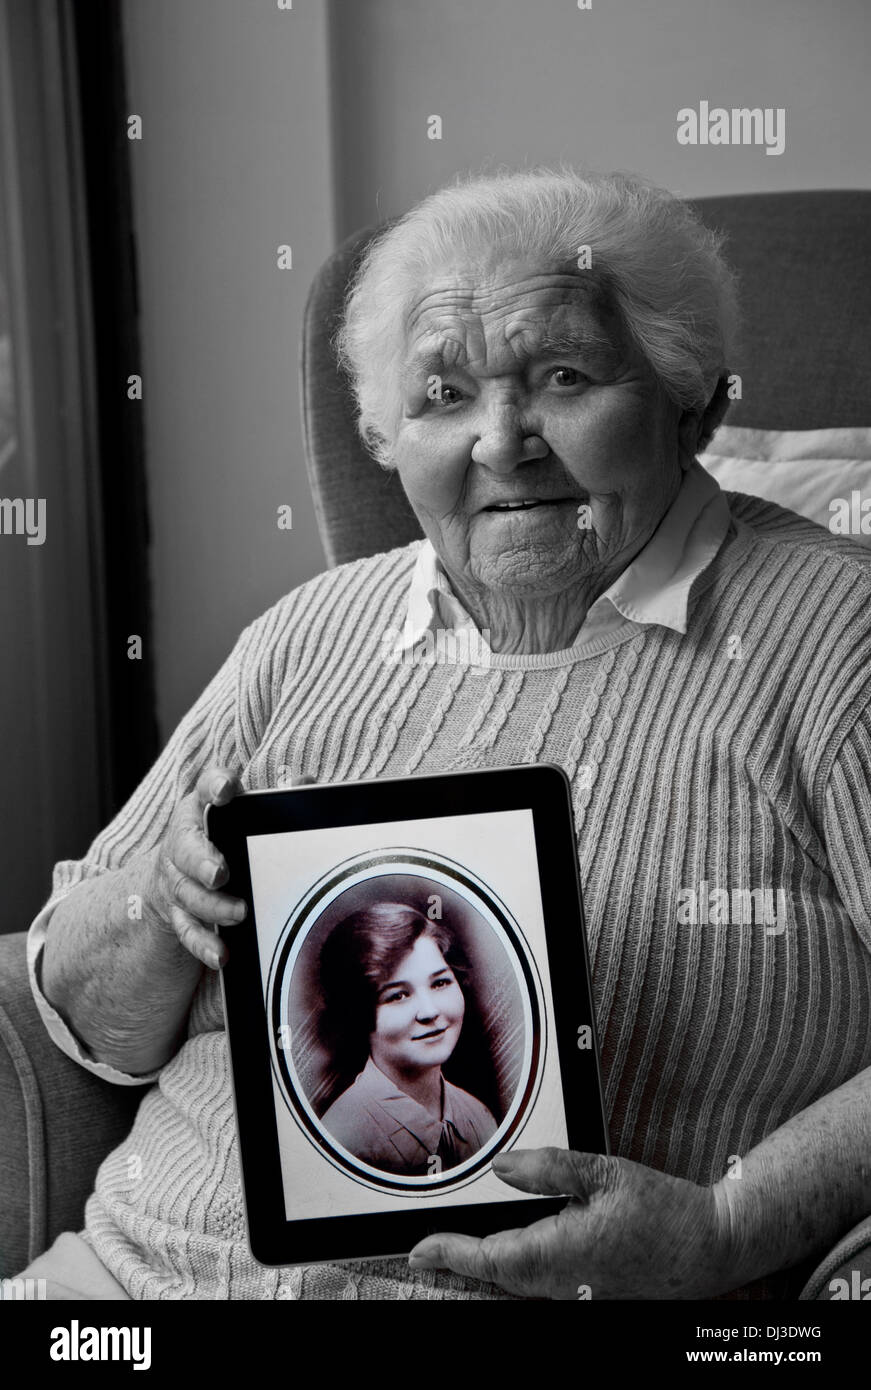 98 years old elderly lady holding an iPad tablet computer, displaying a sepia portrait of herself taken 80 years ago at age 18 Stock Photo